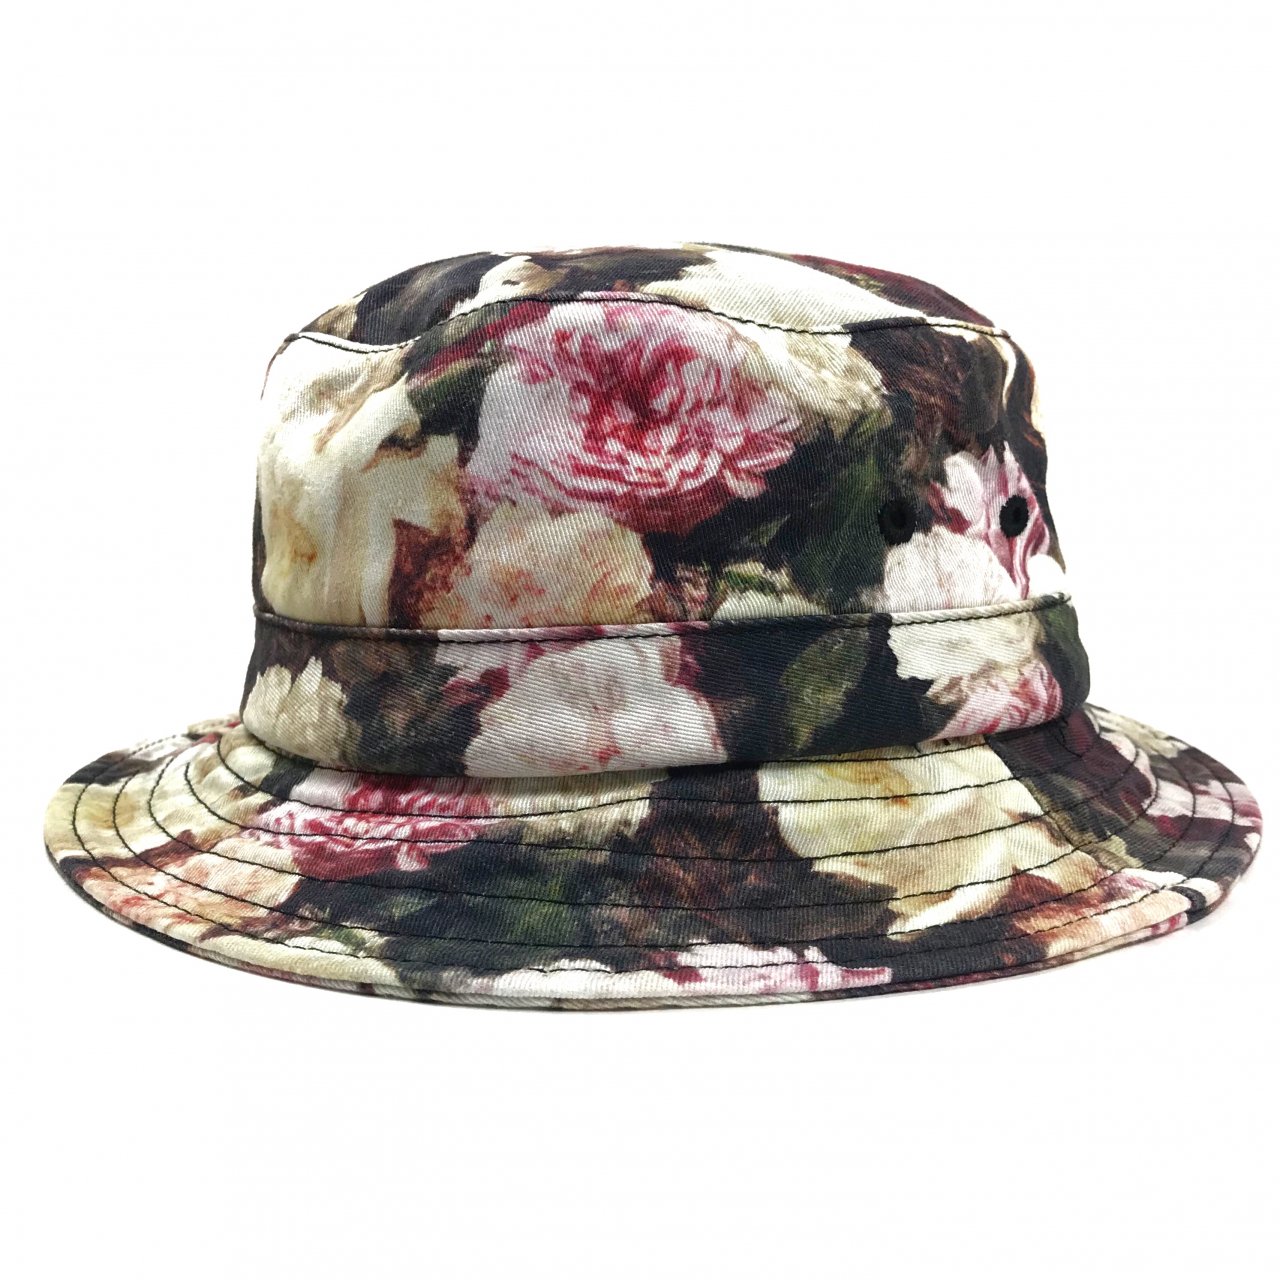 13SS SUPREME PCL (Power Corruption Lies) Crusher Hat マルチカラー シュプリーム PCL